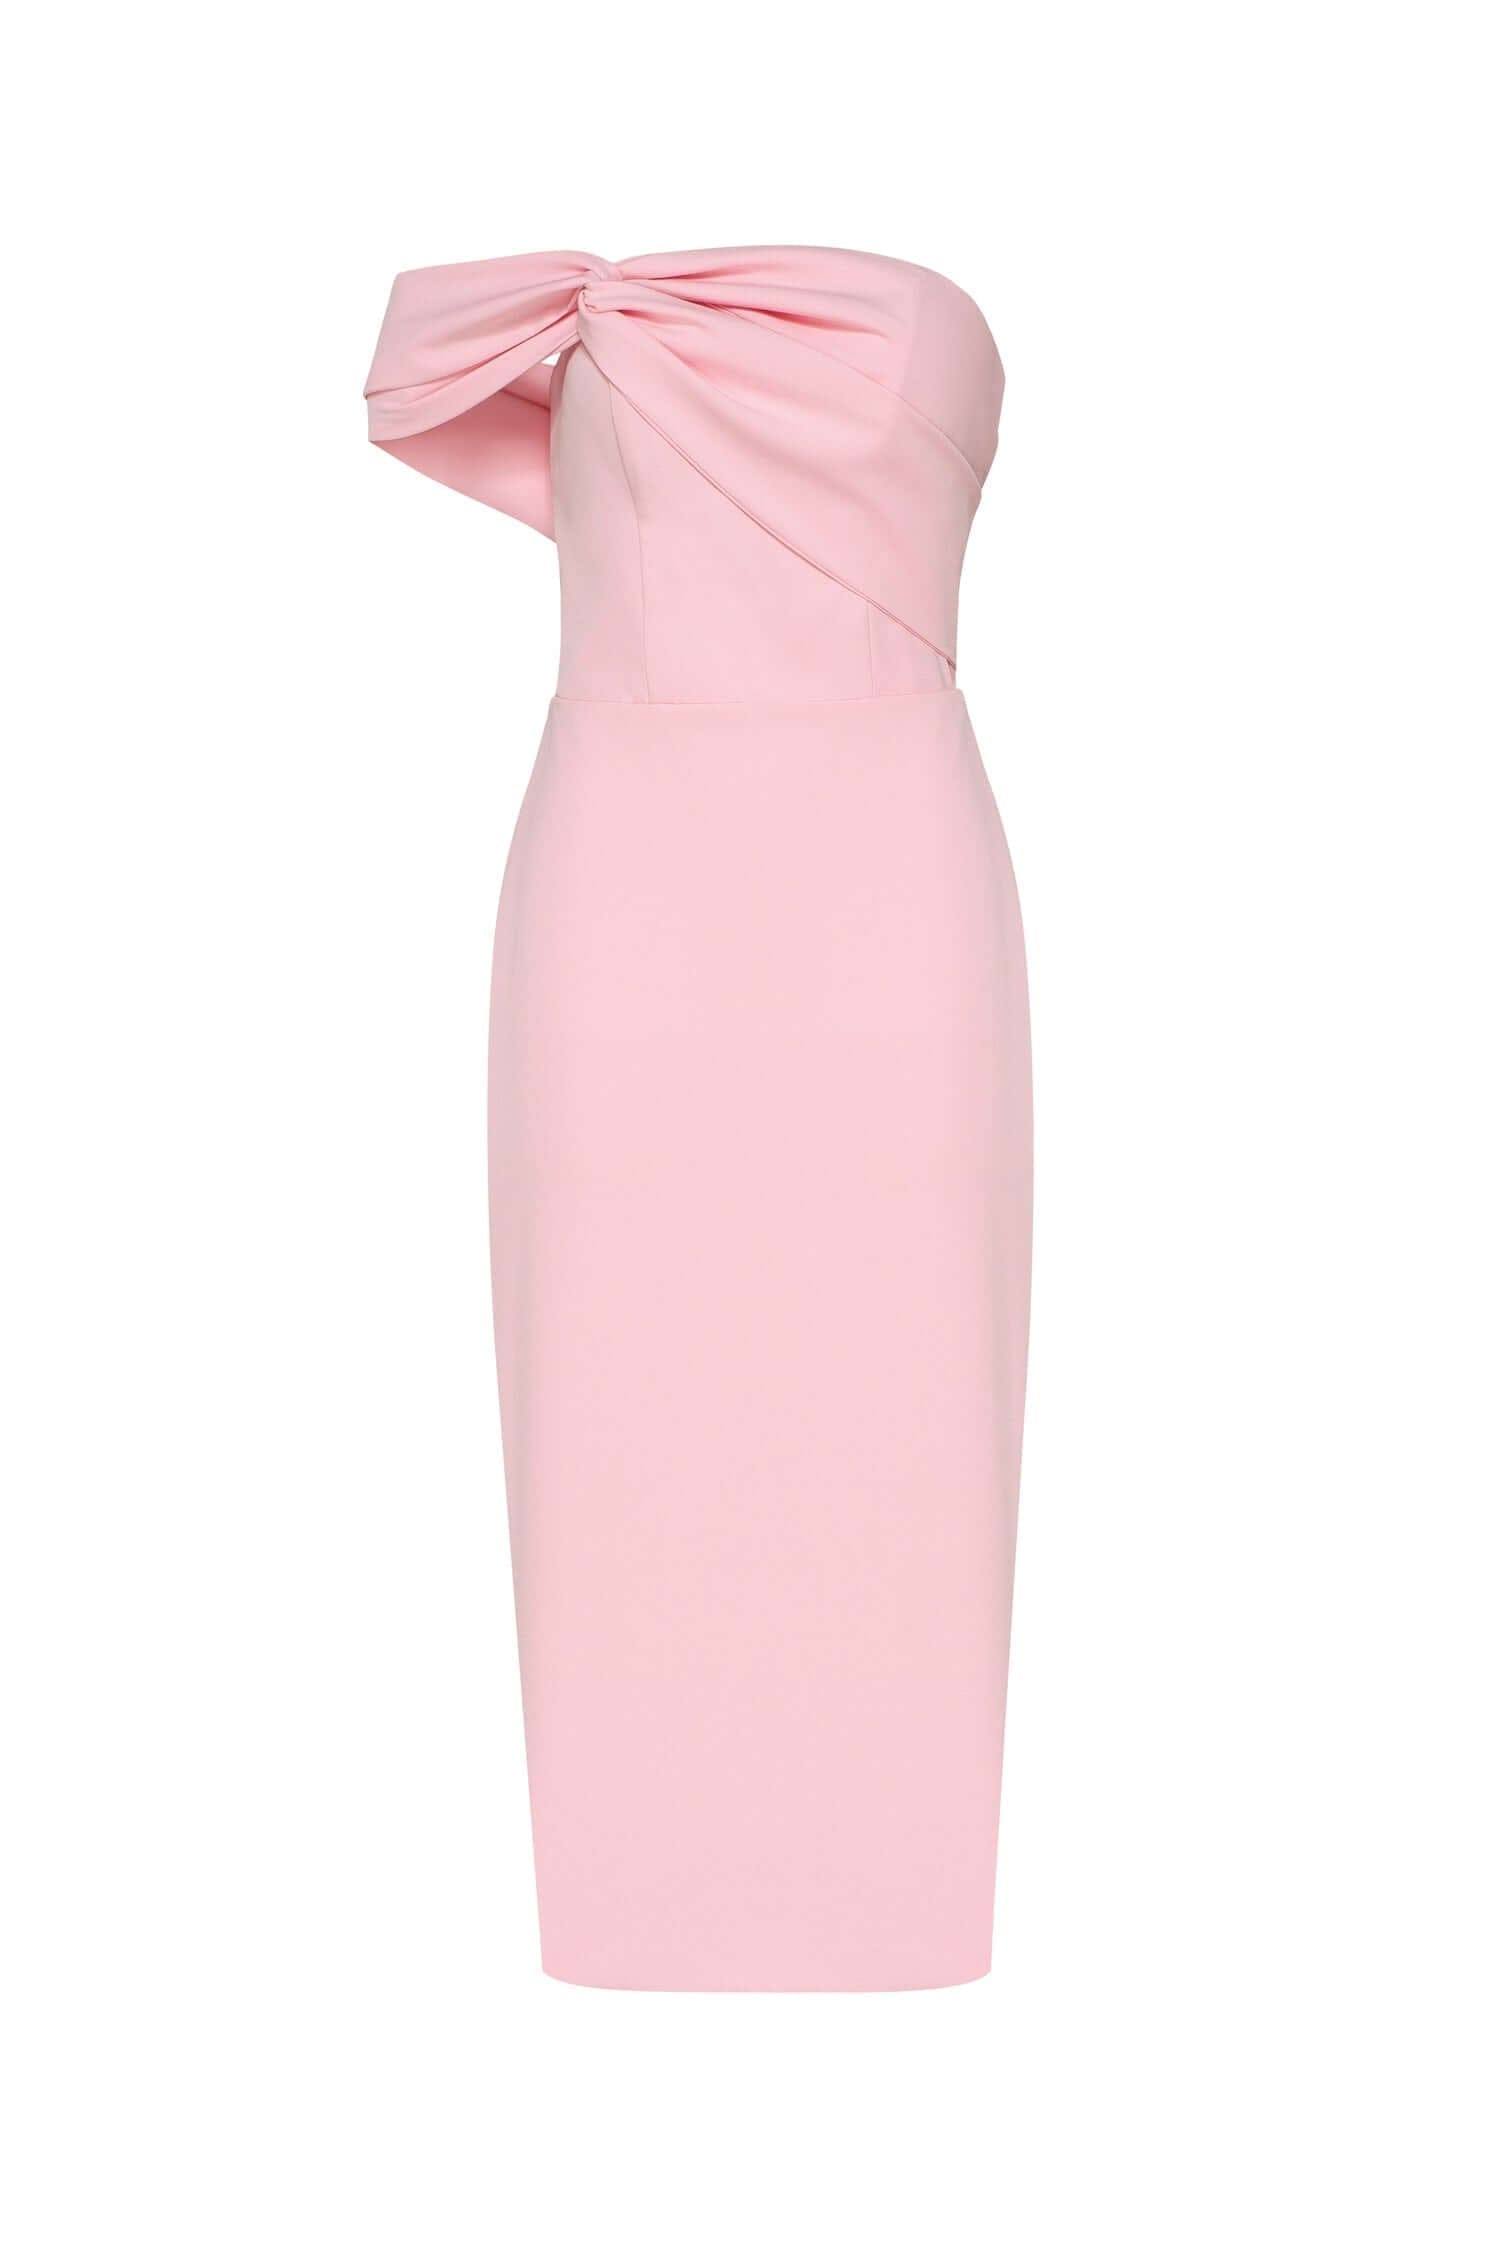 Buy Coral Pink Dresses for Women by Fyre Rose Online | Ajio.com